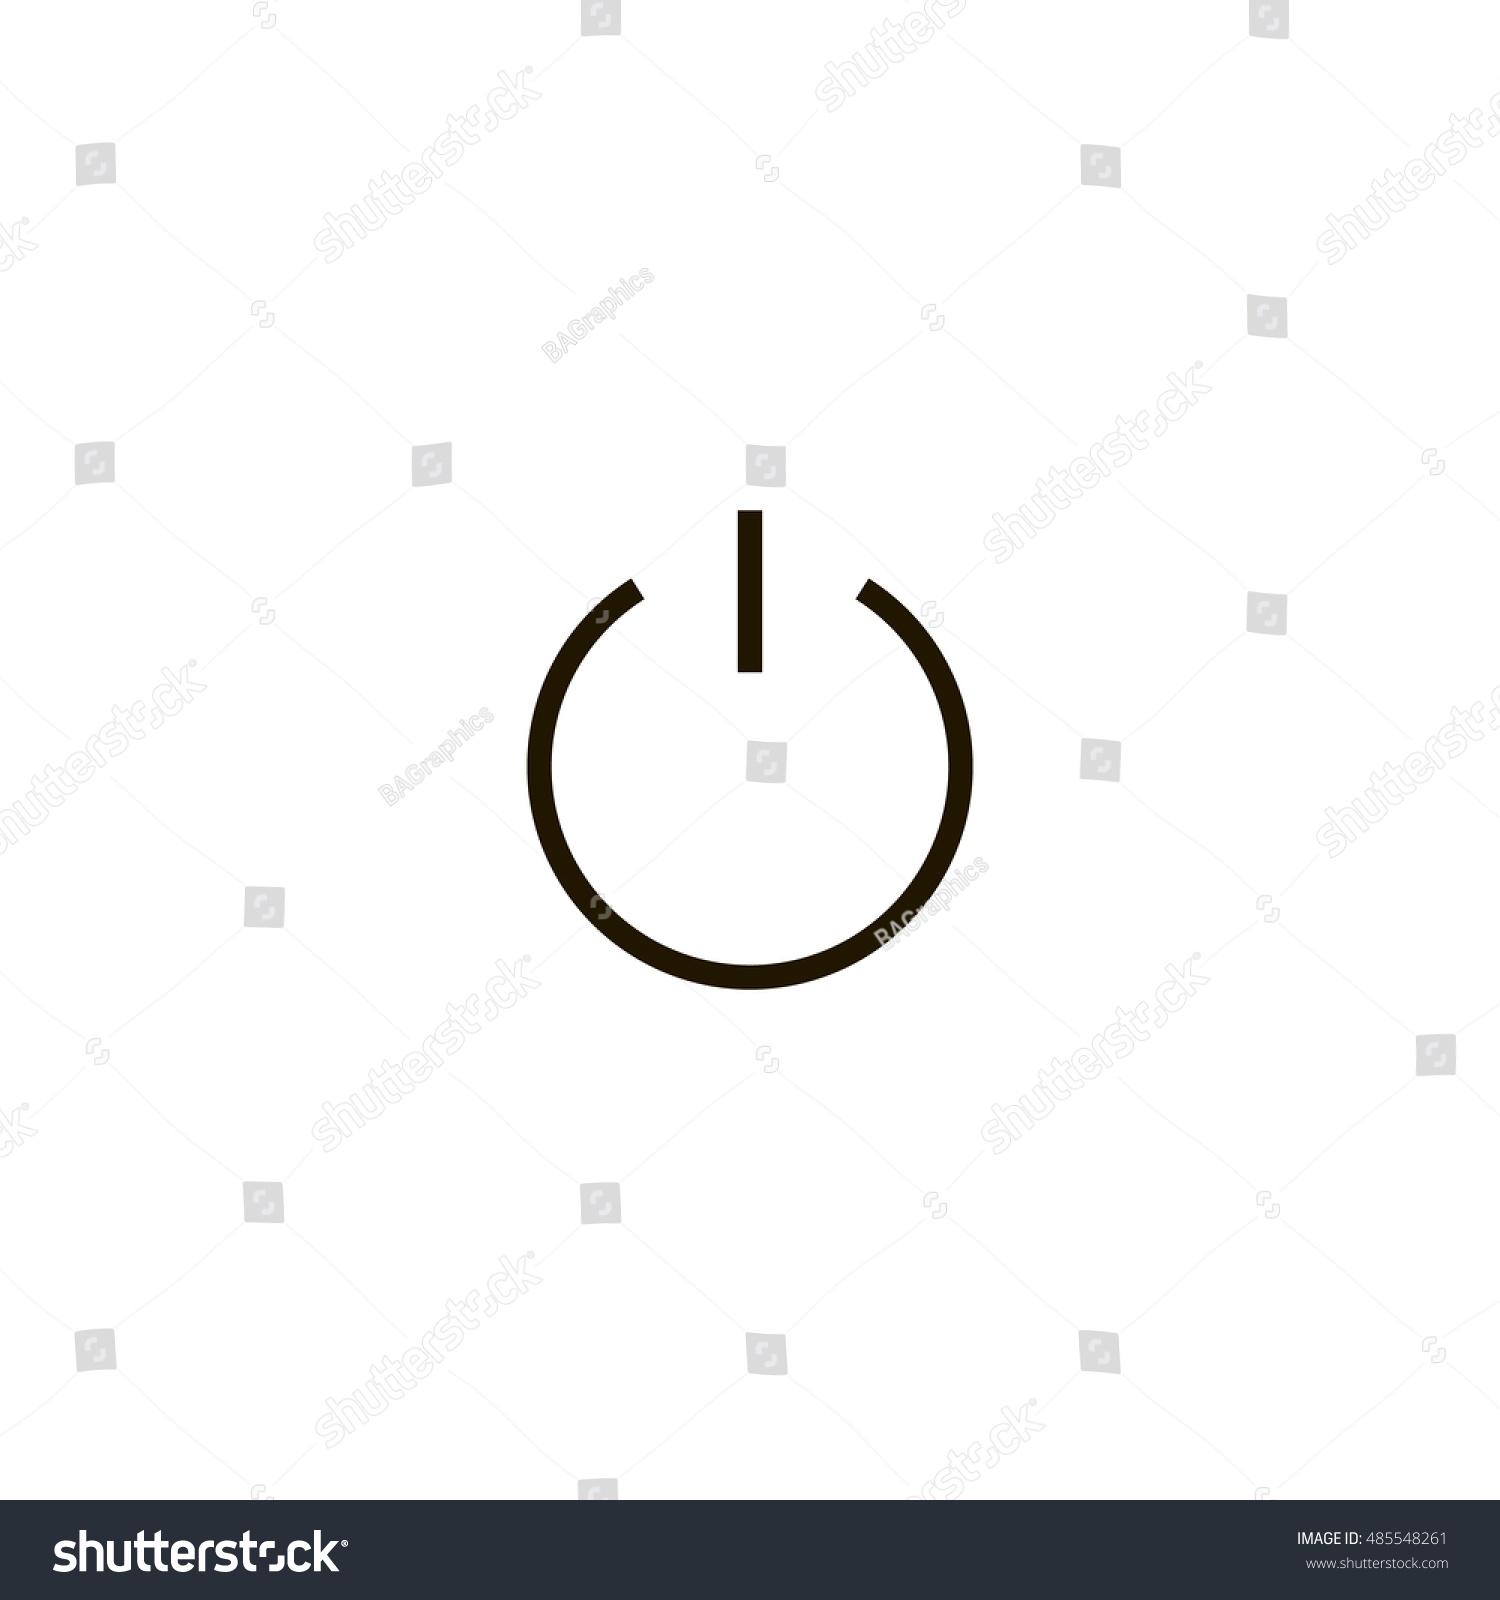 SVG of Power icon vector, clip art. Also useful as logo, web UI element, symbol, graphic image, silhouette and illustration. Compatible with ai, cdr, jpg, png, pdf, svg and eps formats. svg